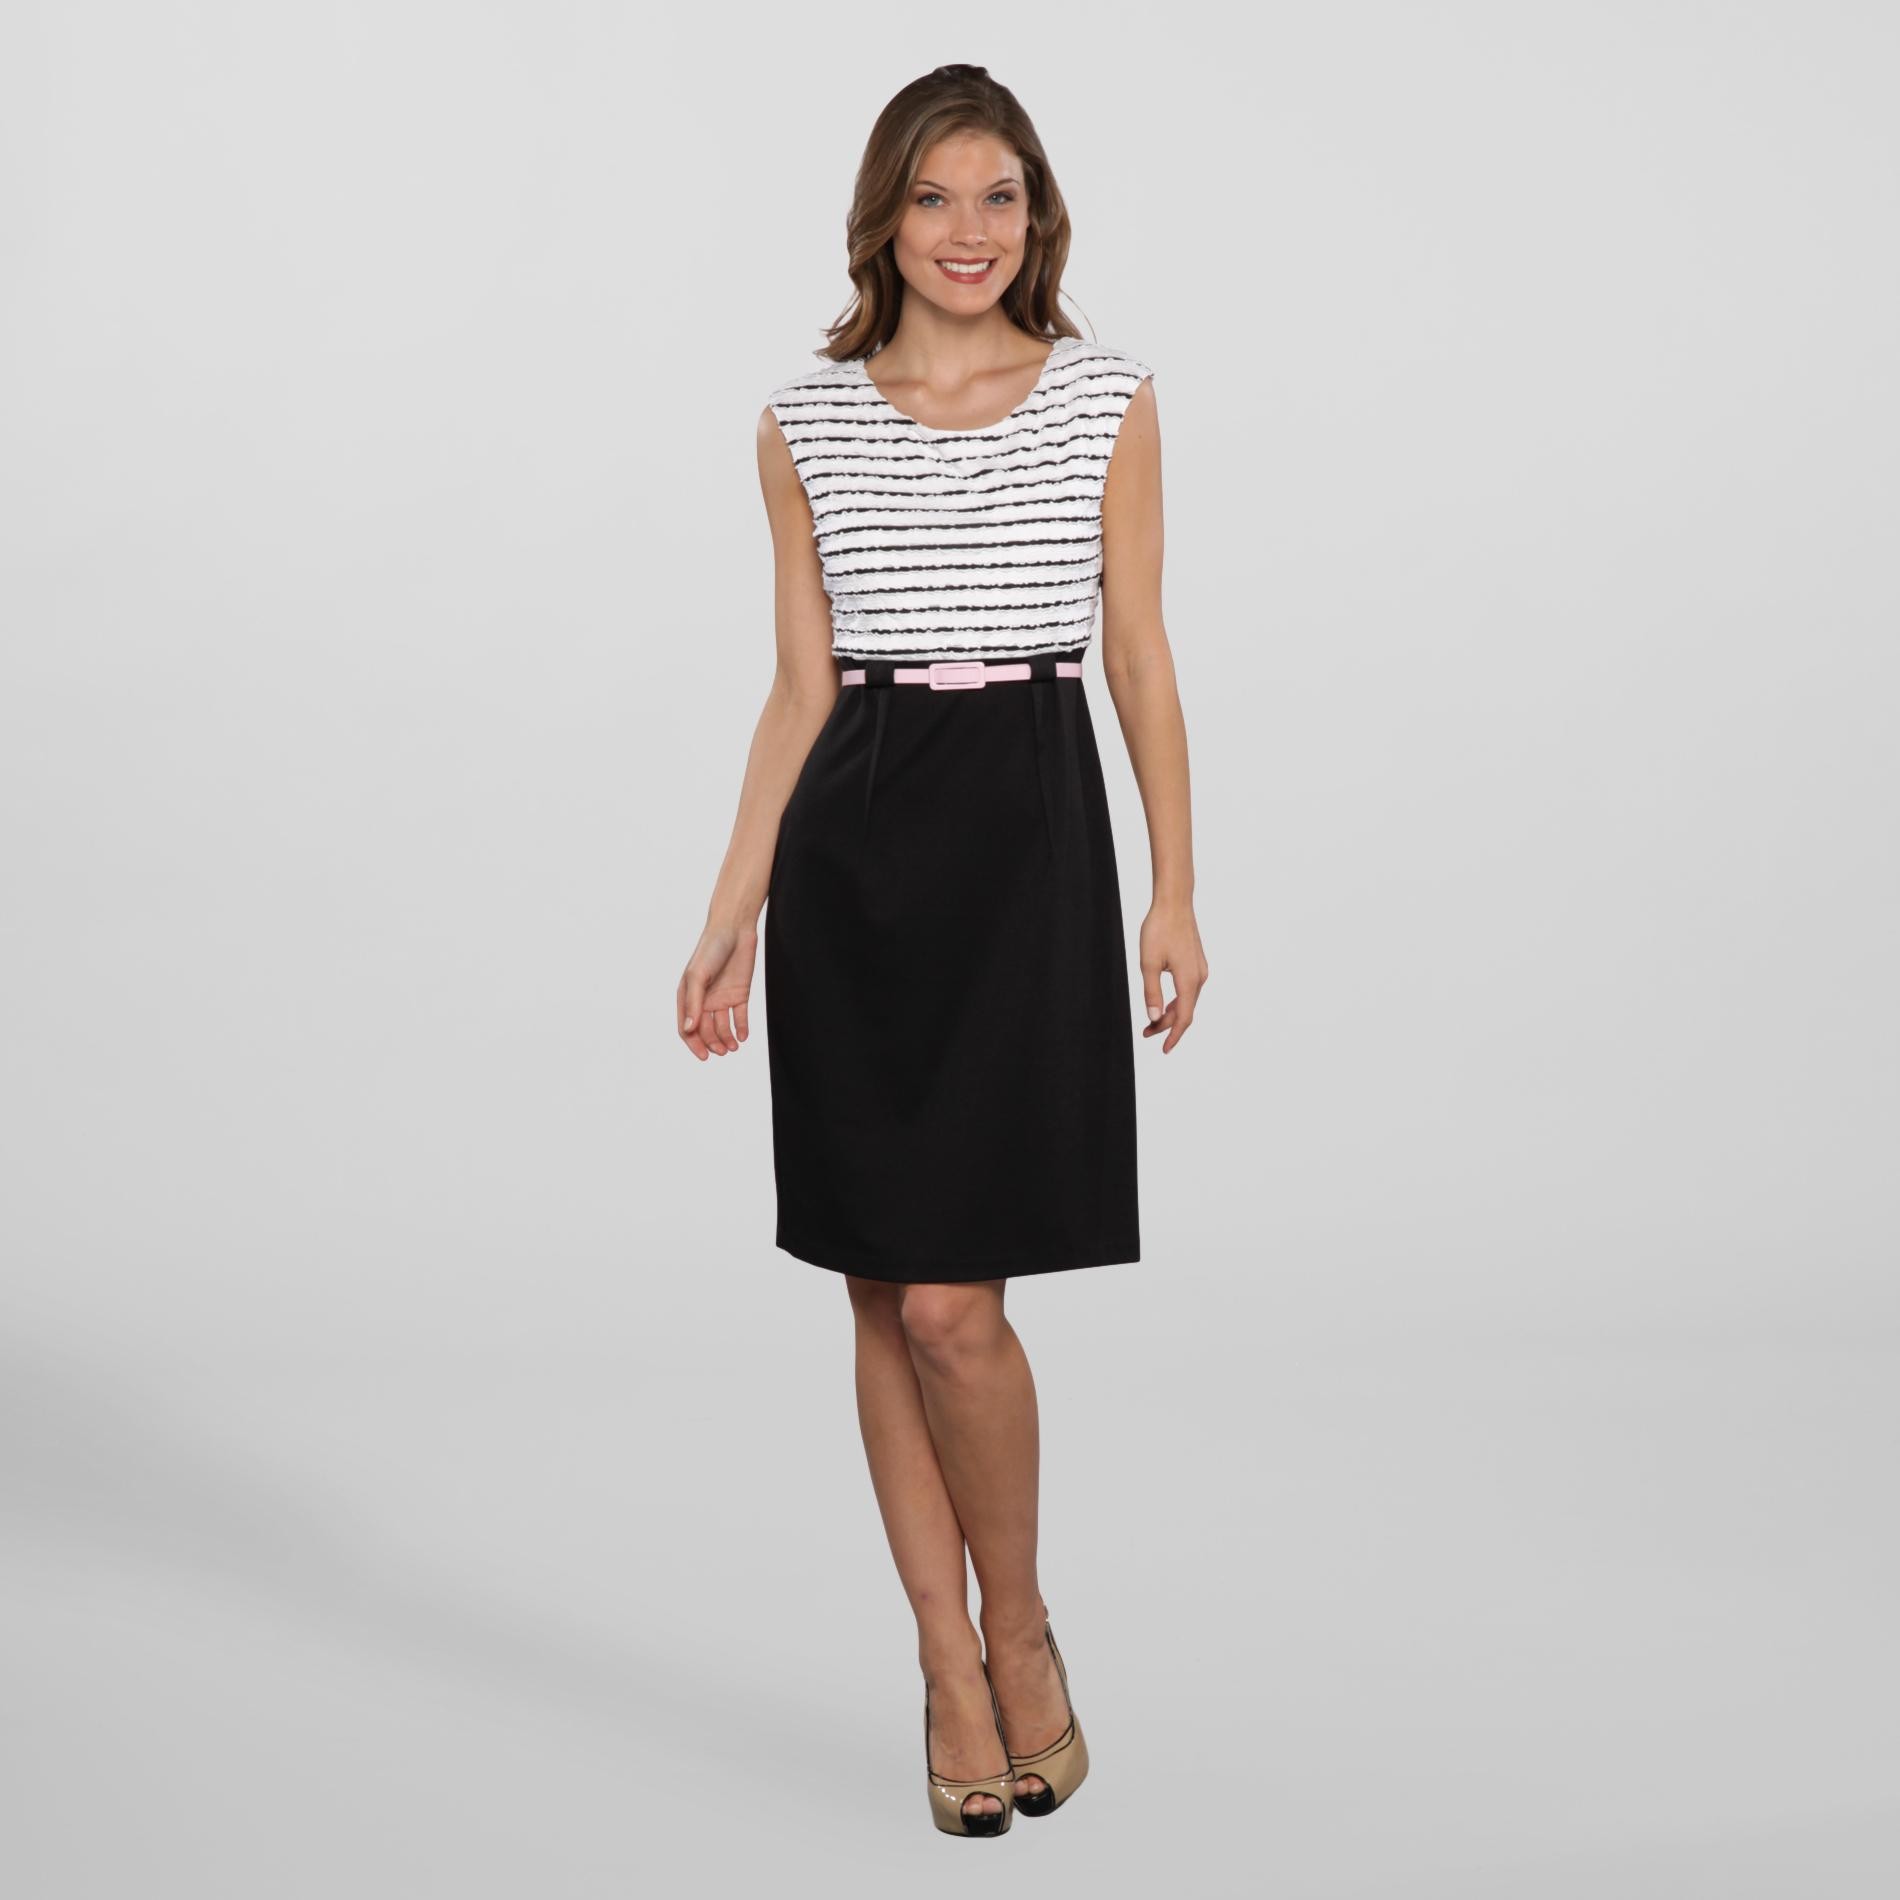 Connected Apparel Women's Party Dress & Belt White/Black/Pink 8